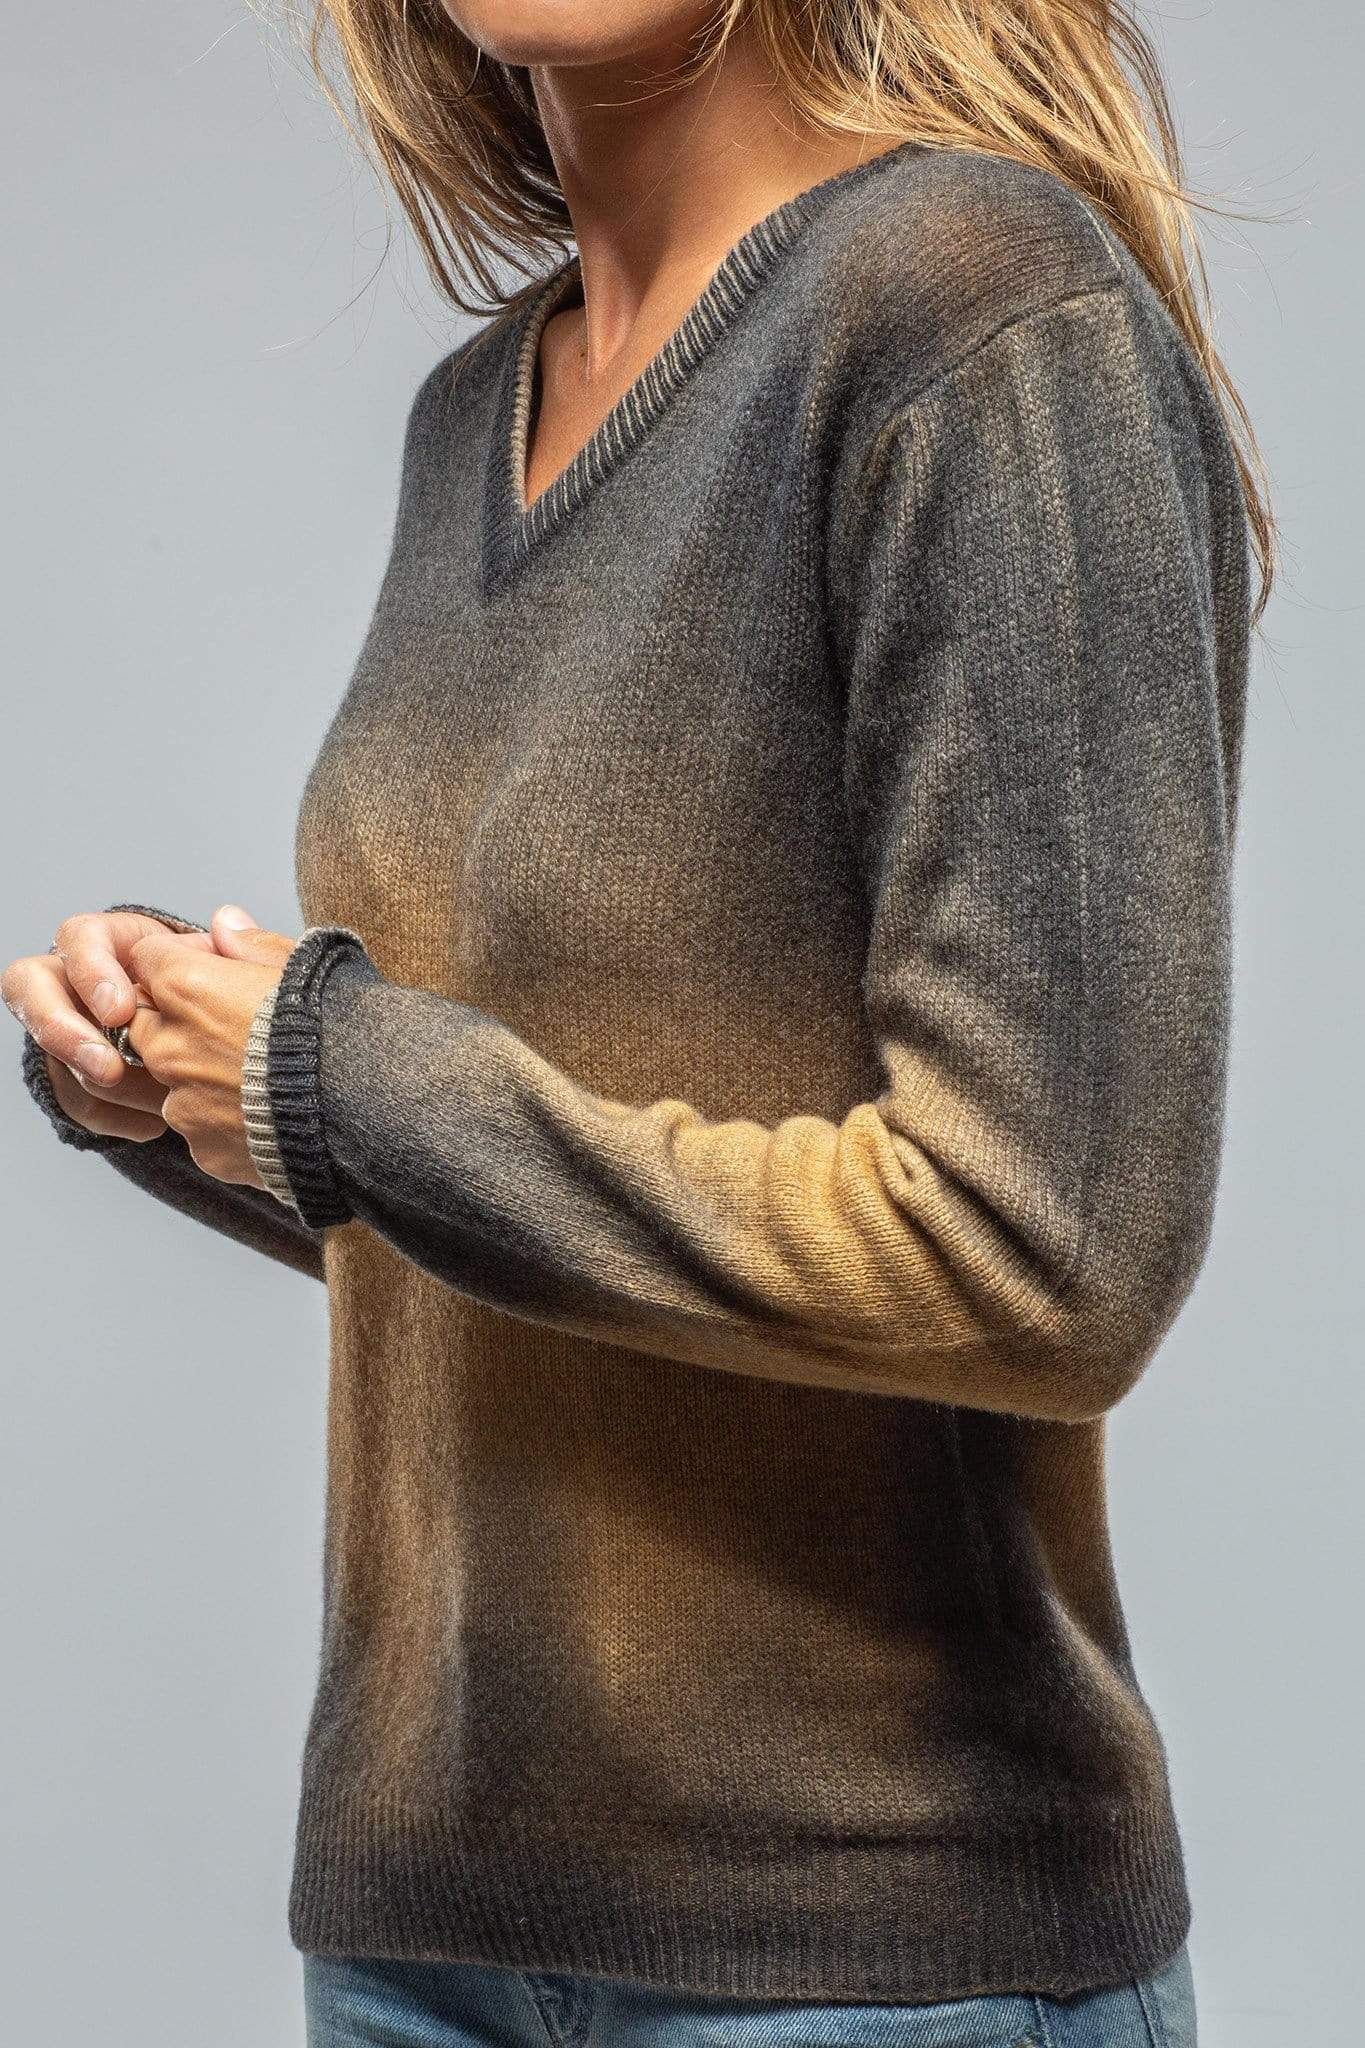 Andy Over-Dyed Cashmere V-Neck In Ocra - AXEL'S